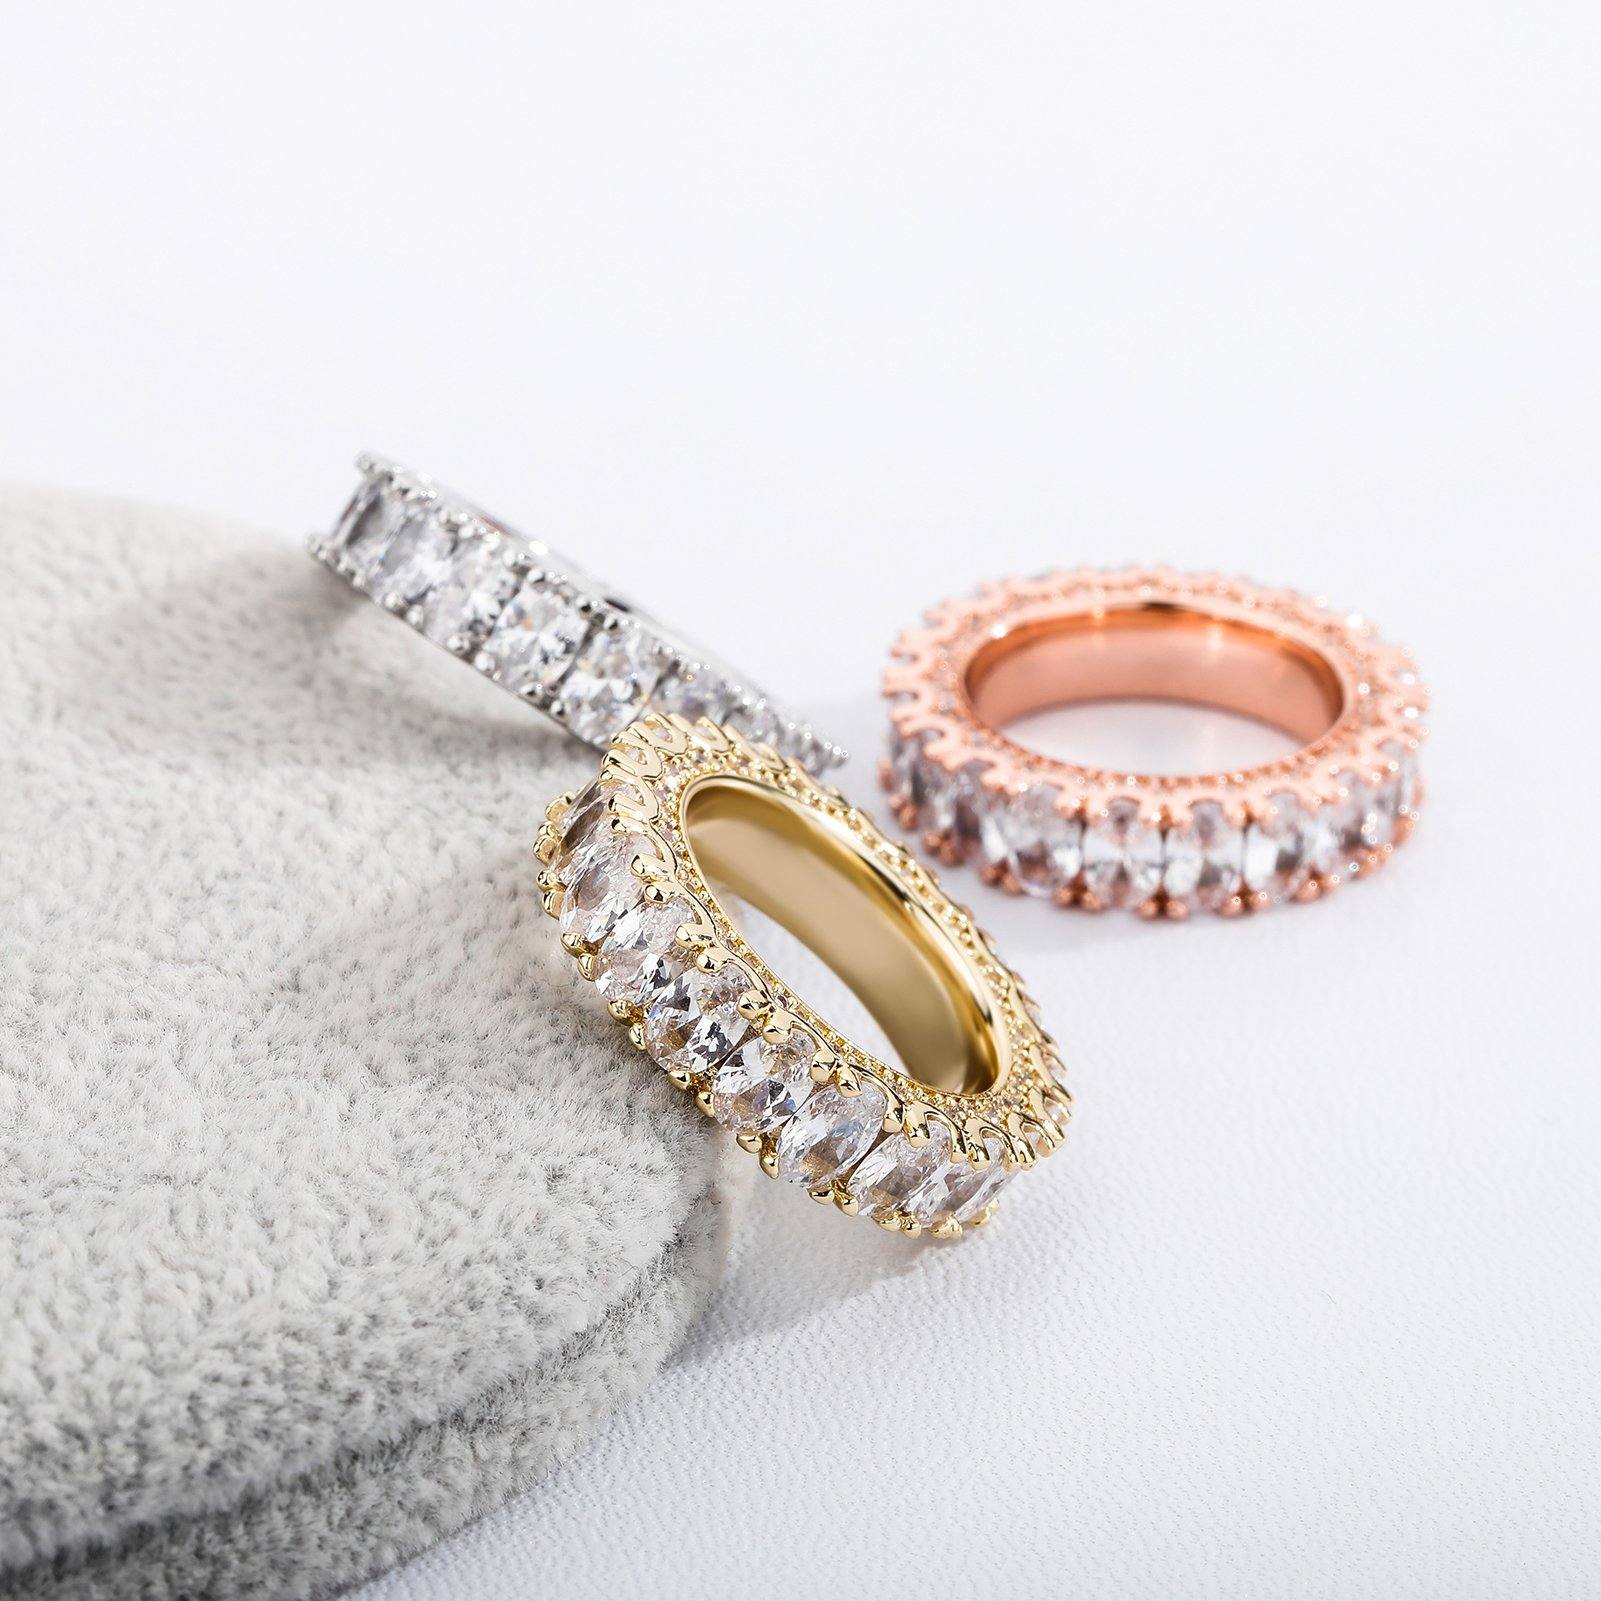 New Baguette Rings - Sliver - Alliceonyou